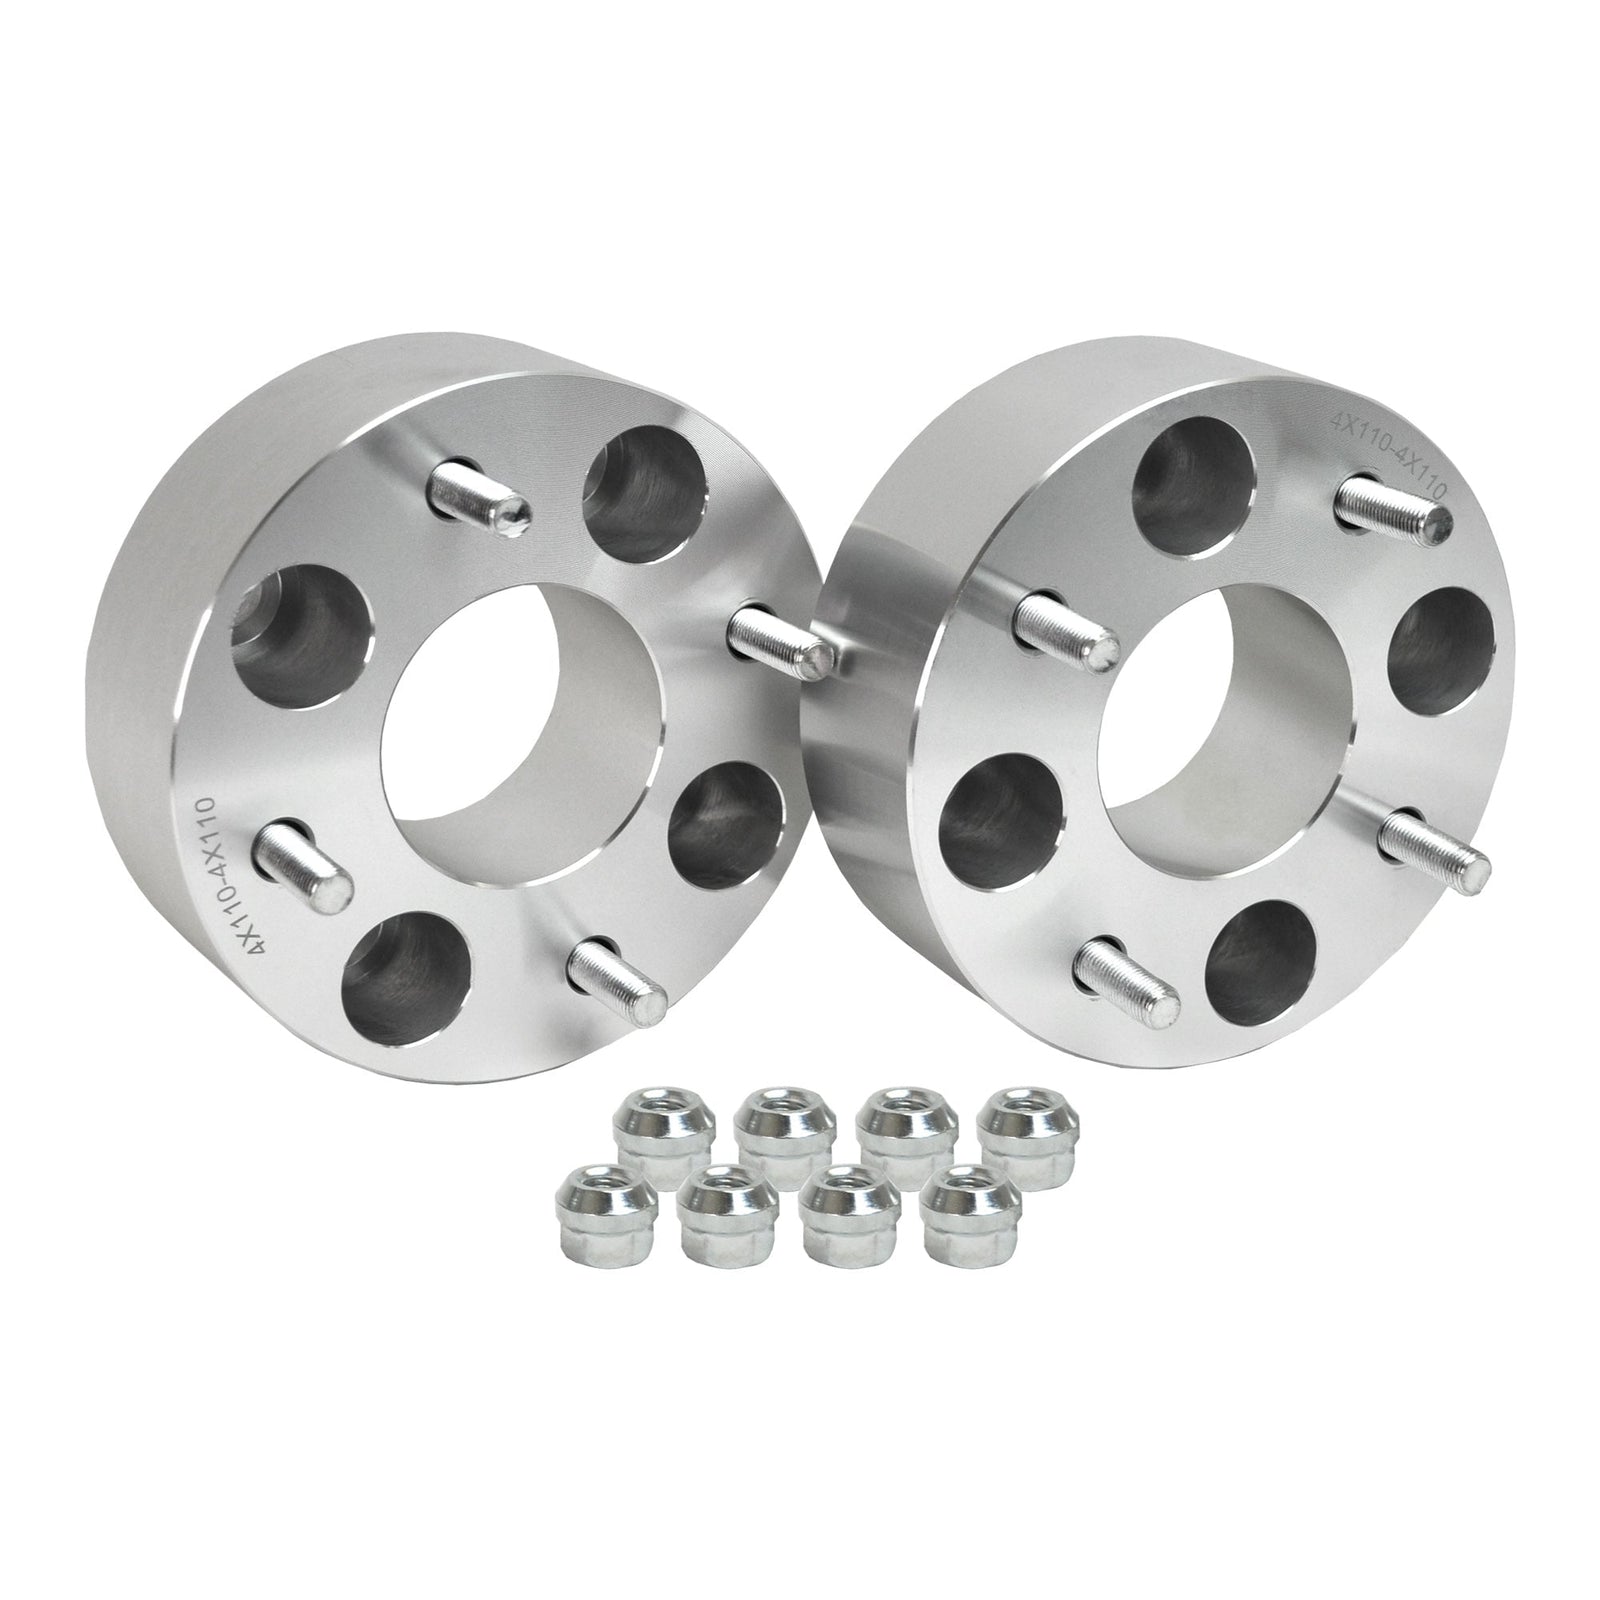 Arctic Cat Prowler 650 Rugged Wheel Spacer